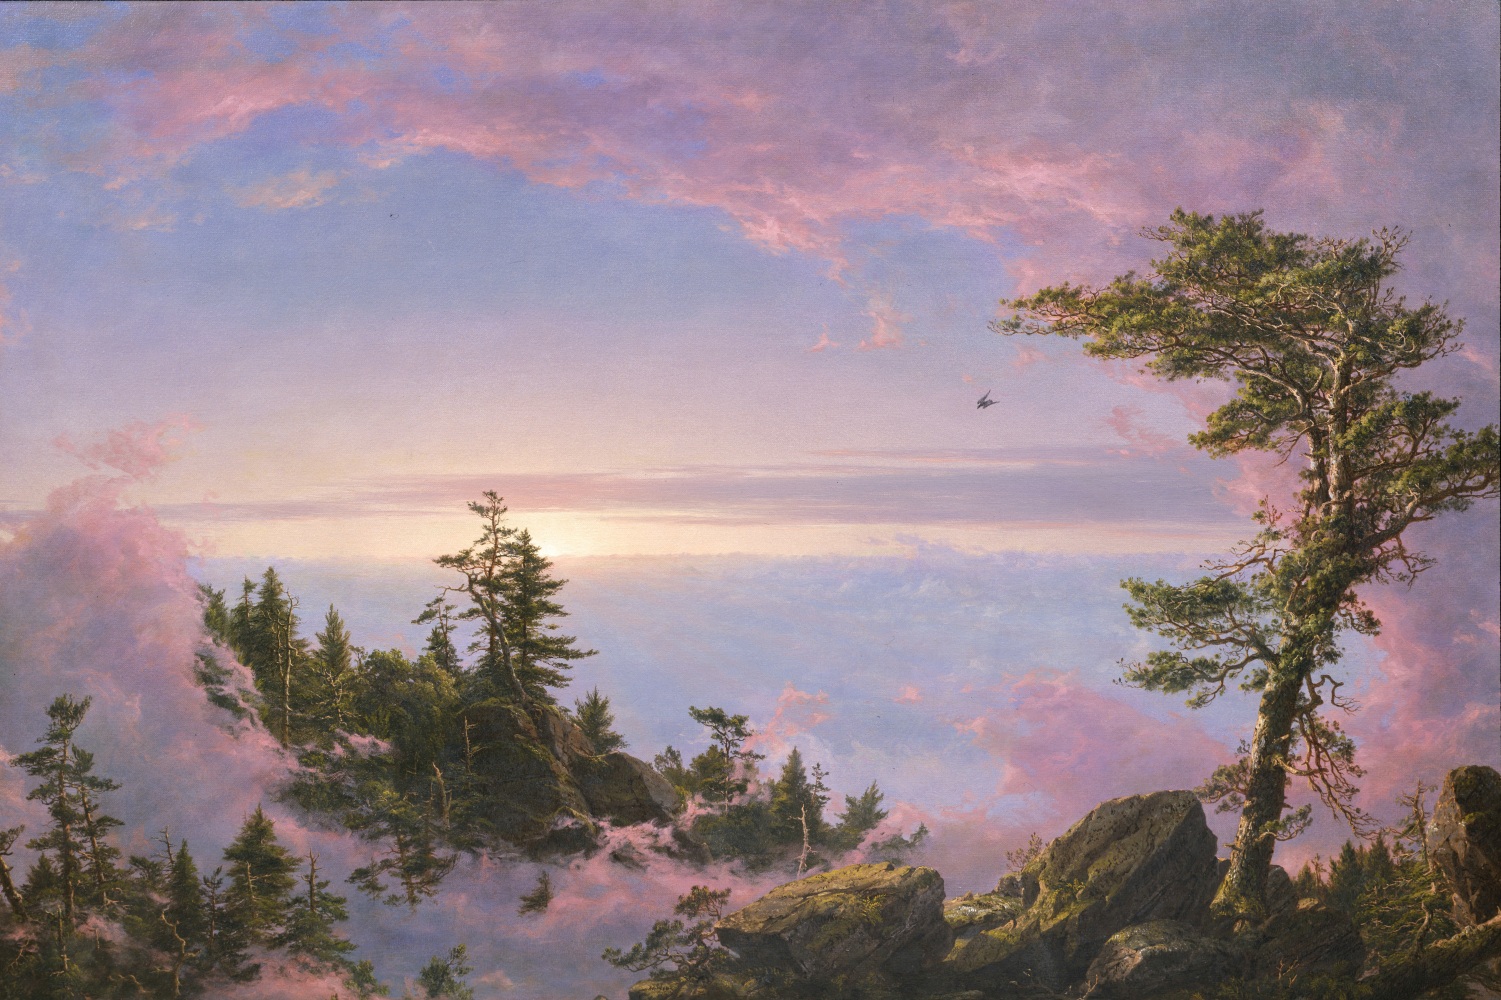 Frederic Edwin Church

Above the Clouds at Sunrise

1849

oil on canvas&amp;nbsp;

27 1/4 x 40 inches (69.2 x 101.6 cm)&amp;nbsp;